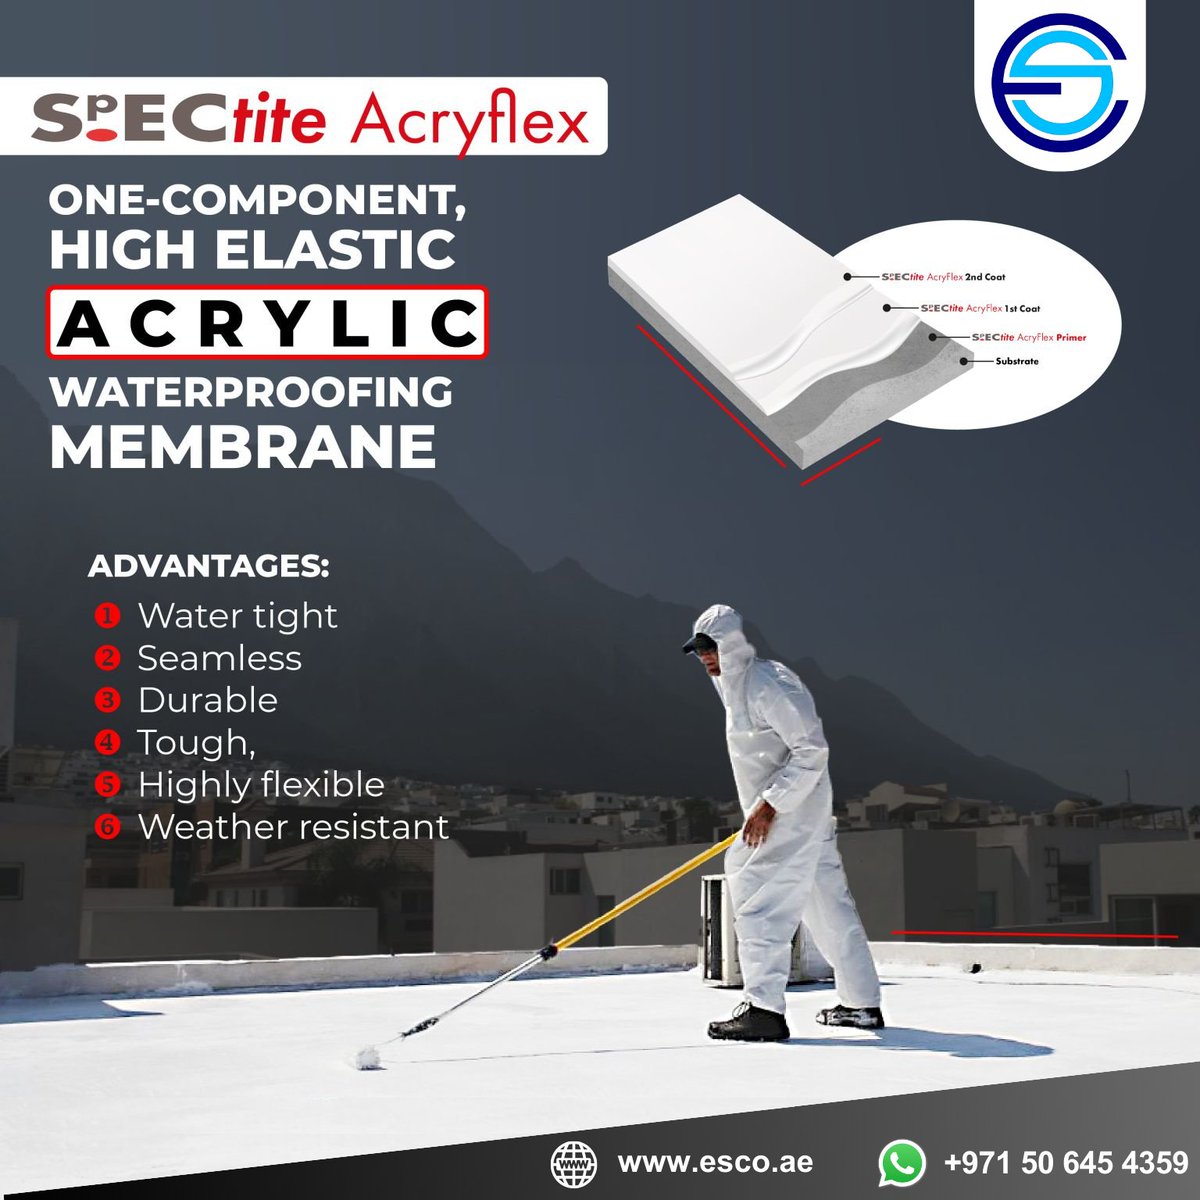 #SpECtiteAcryflex utilises the latest in  acrylic polymerization technology to perform UV resistant membrane with  excellent durability even in harsh/hot climatic conditions.

WhatsApp: (050 645 4359)

#acrylic #waterproofingsolutions
#ConstructionsChemicals #waterproofing